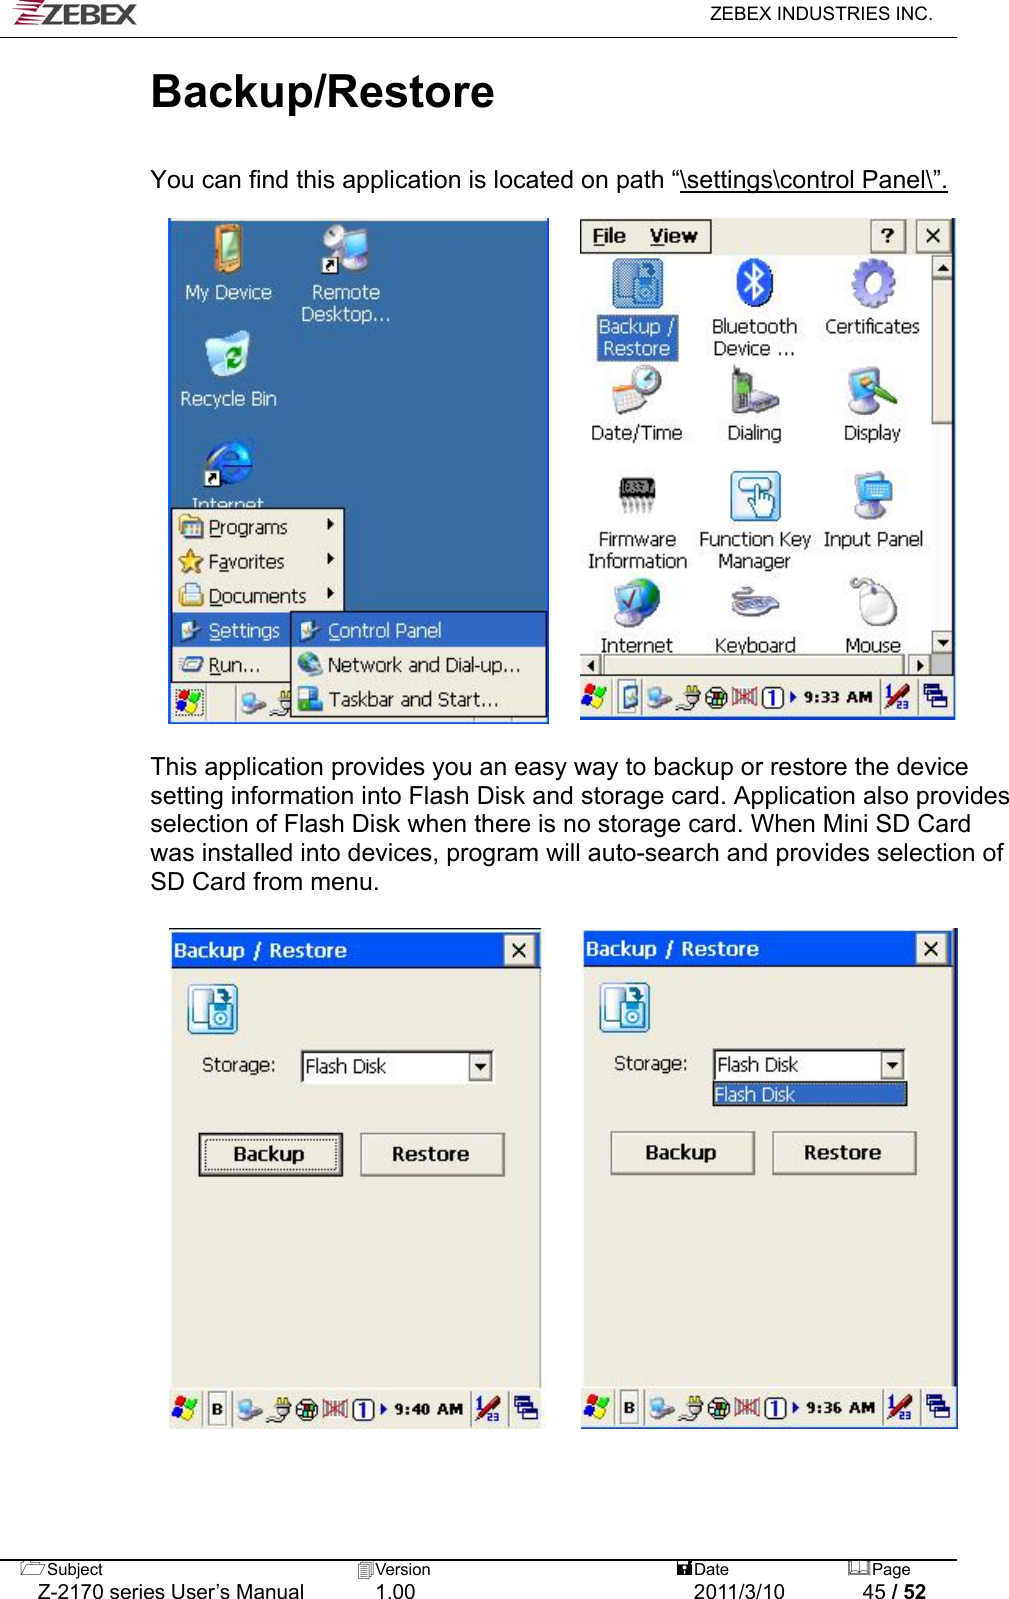   ZEBEX INDUSTRIES INC.  Backup/Restore    You can find this application is located on path “\settings\control Panel\”.                     This application provides you an easy way to backup or restore the device setting information into Flash Disk and storage card. Application also provides selection of Flash Disk when there is no storage card. When Mini SD Card was installed into devices, program will auto-search and provides selection of SD Card from menu.                           Subject  Version   DatePage   Z-2170 series User’s Manual  1.00  2011/3/10  45 / 52 